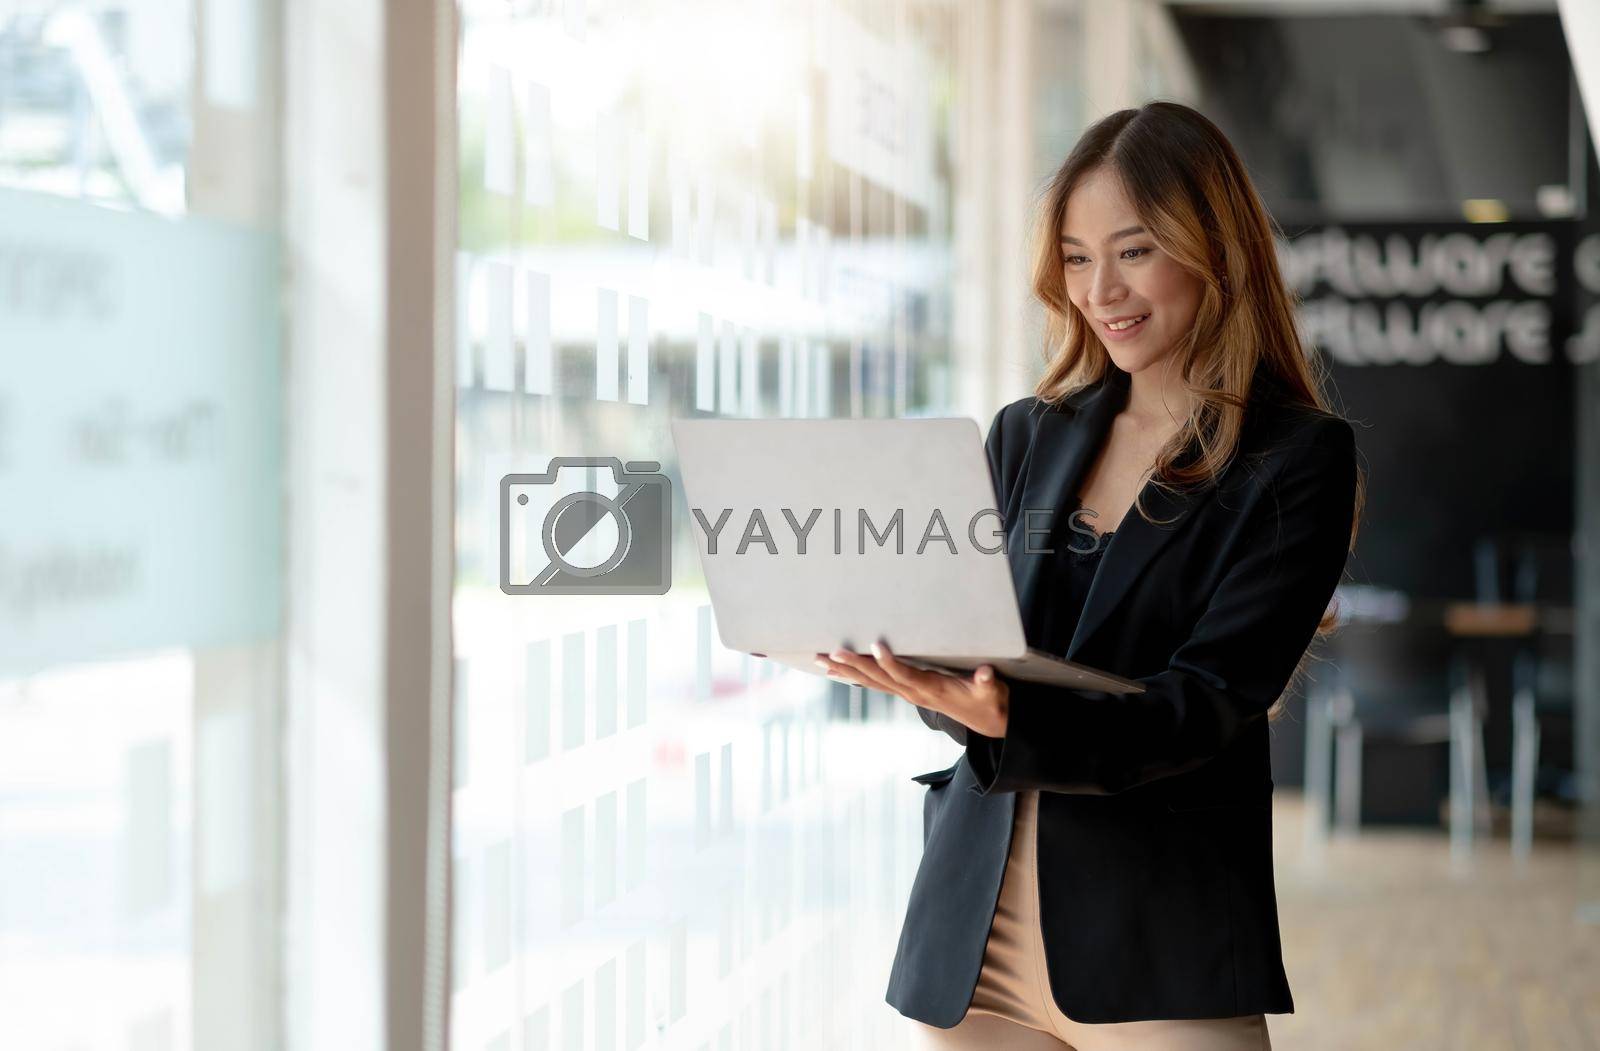 Royalty free image of Young Asian business woman working online on a laptop by wichayada